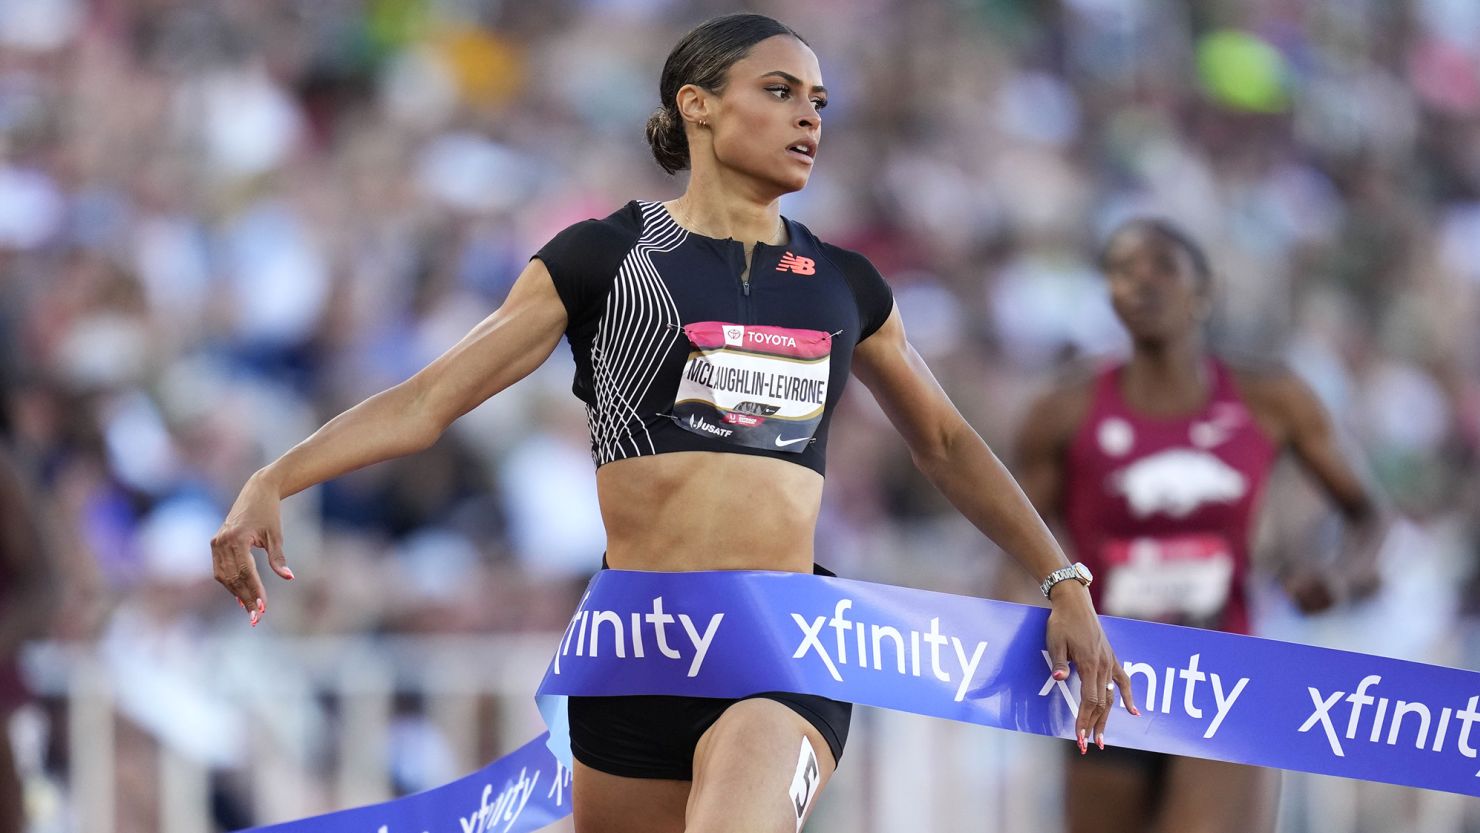 Sydney McLaughlin-Levrone wins 400-meter title at US track and